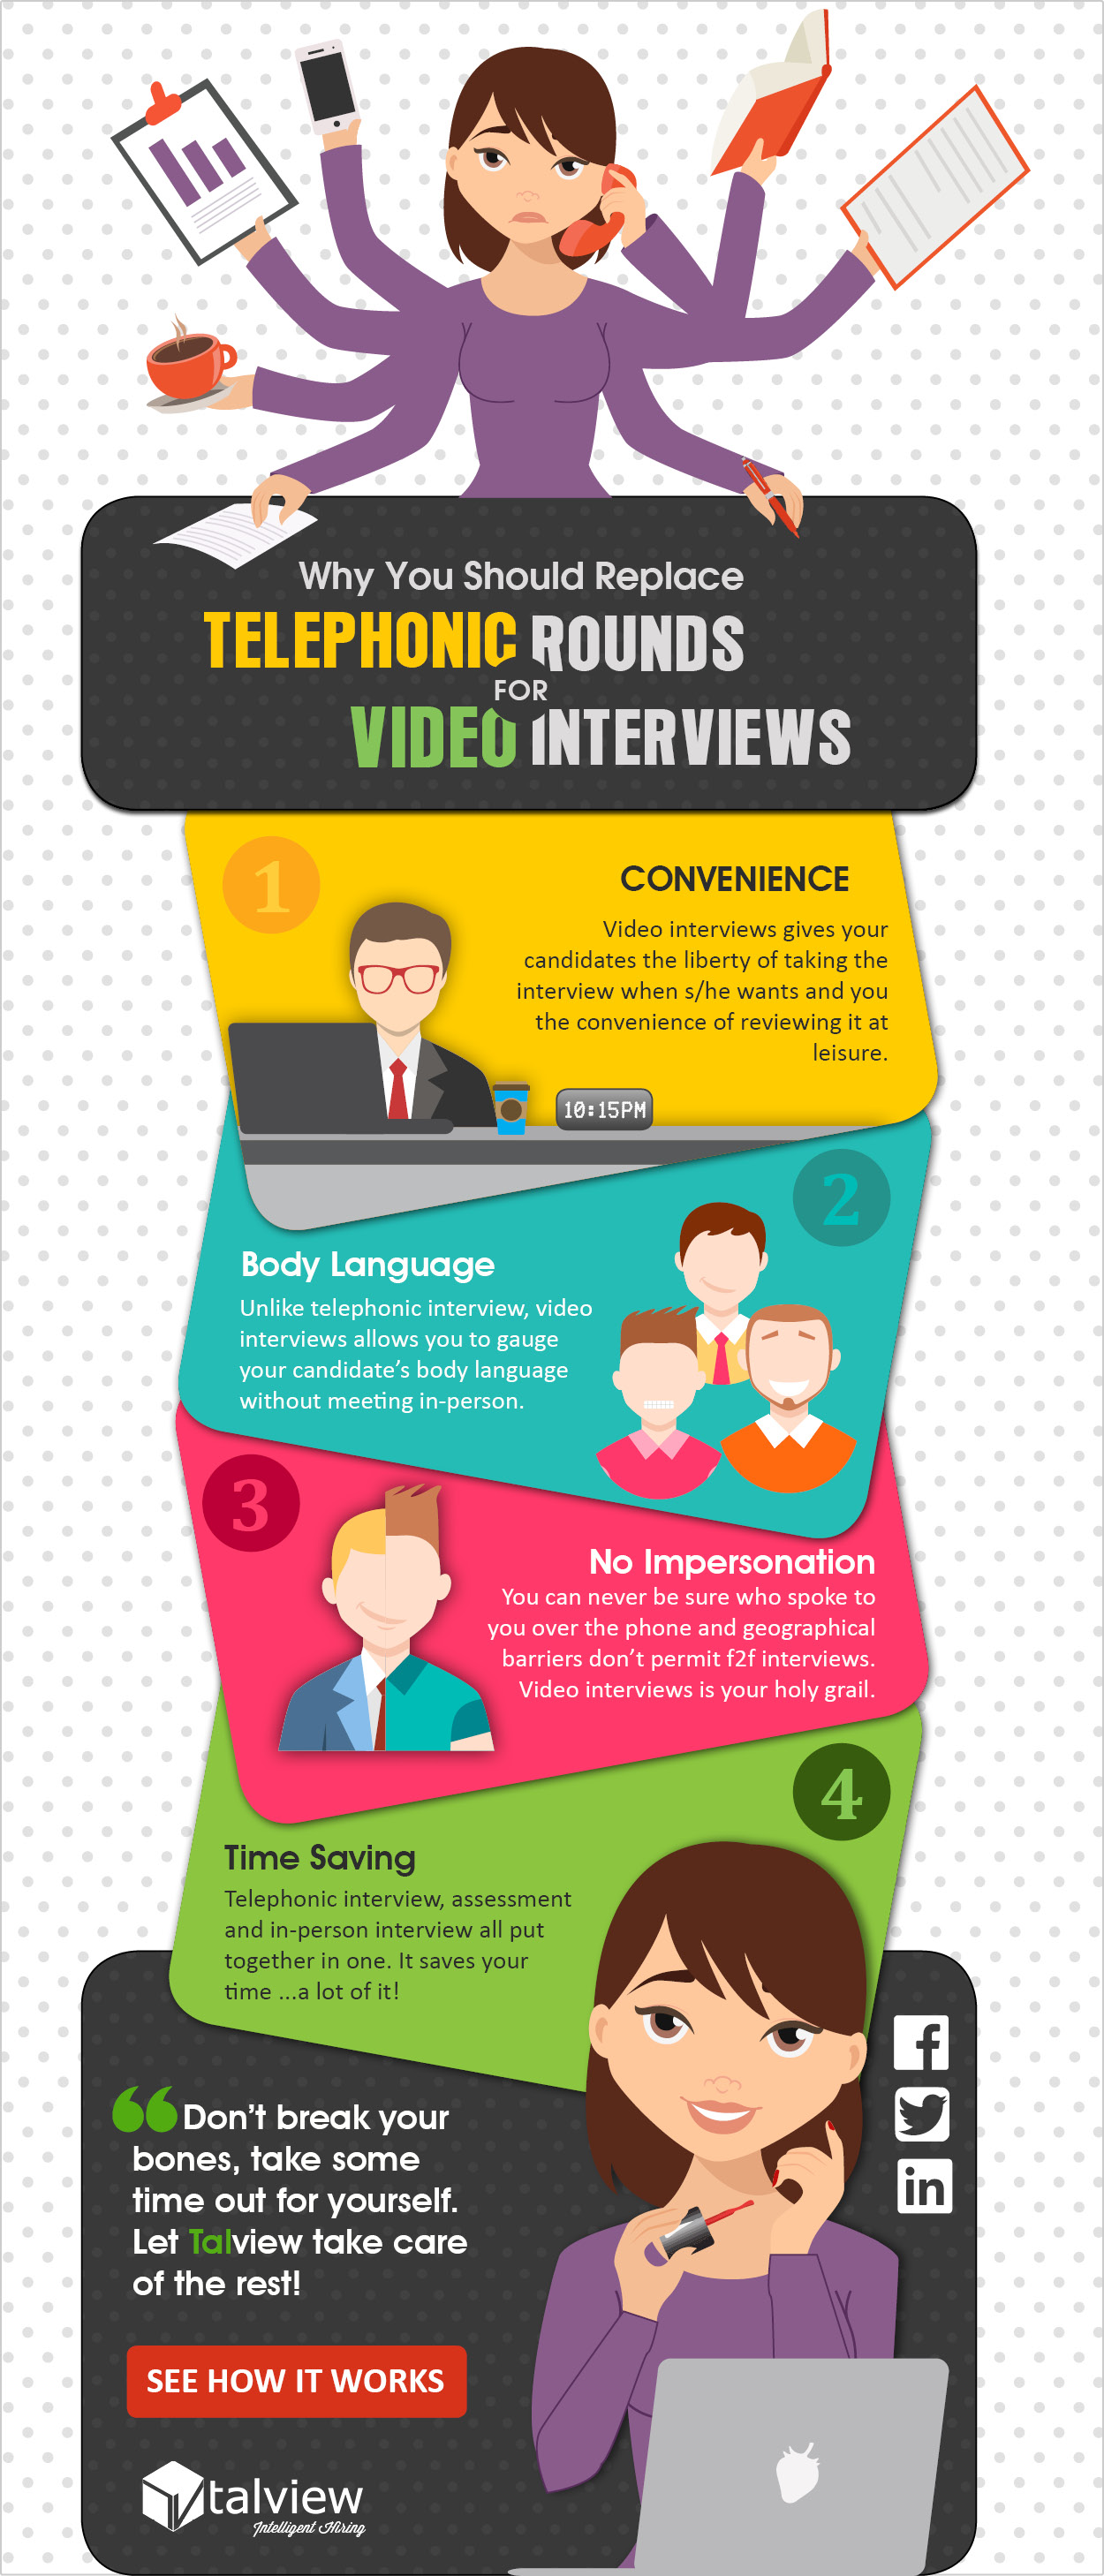 Why Video Interviews Instead of Telephonic